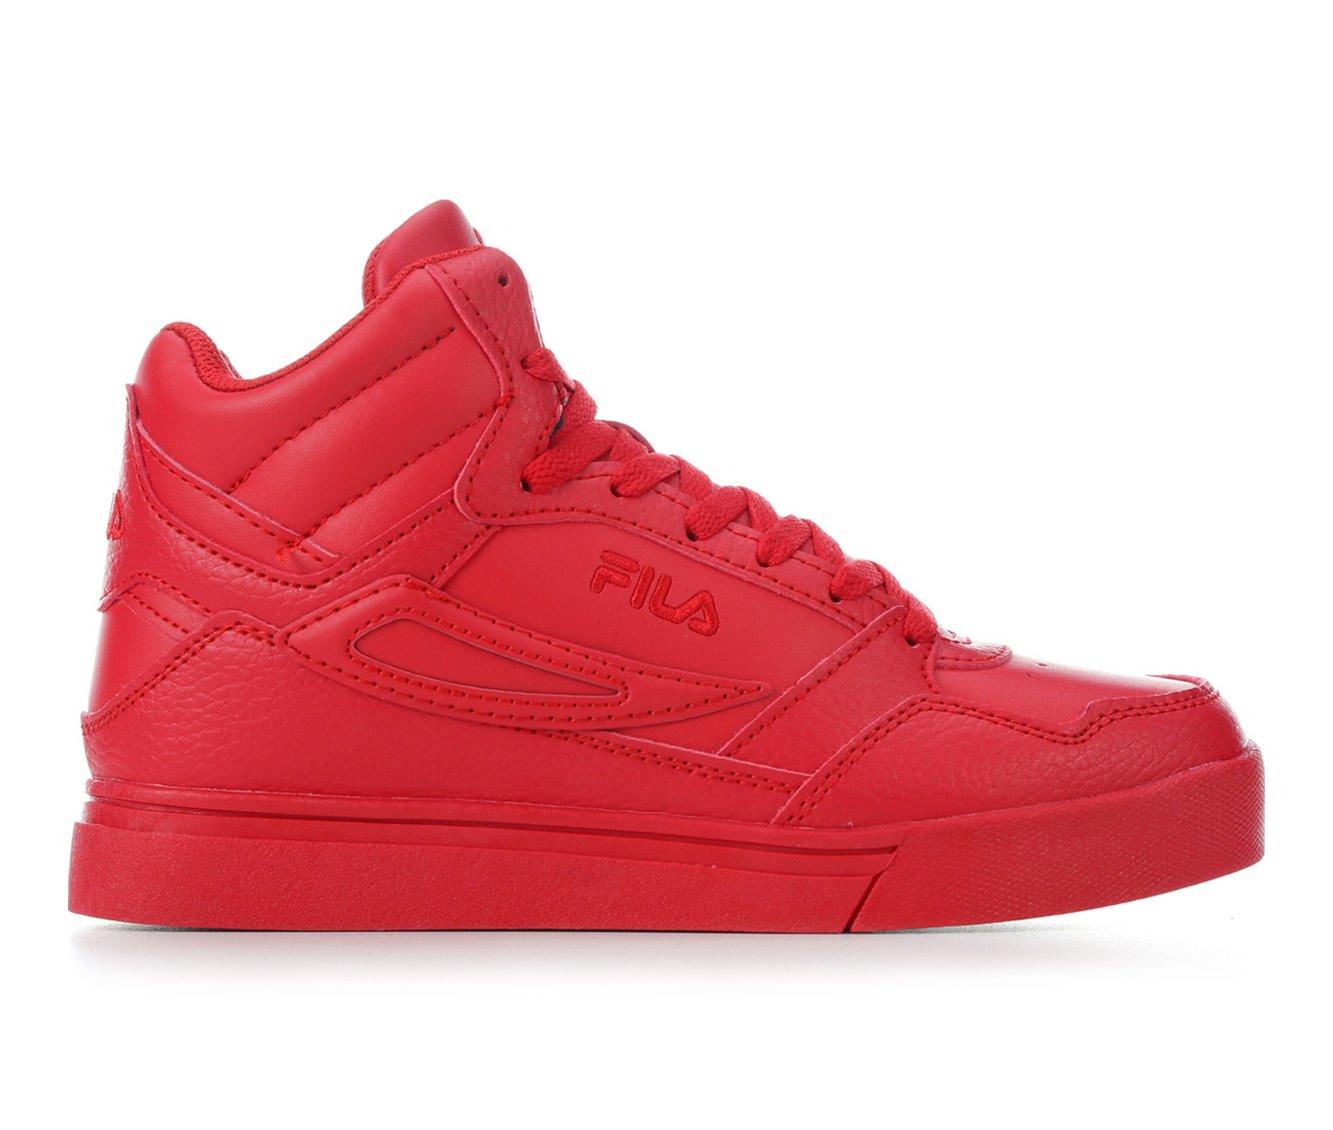 all red high top filas